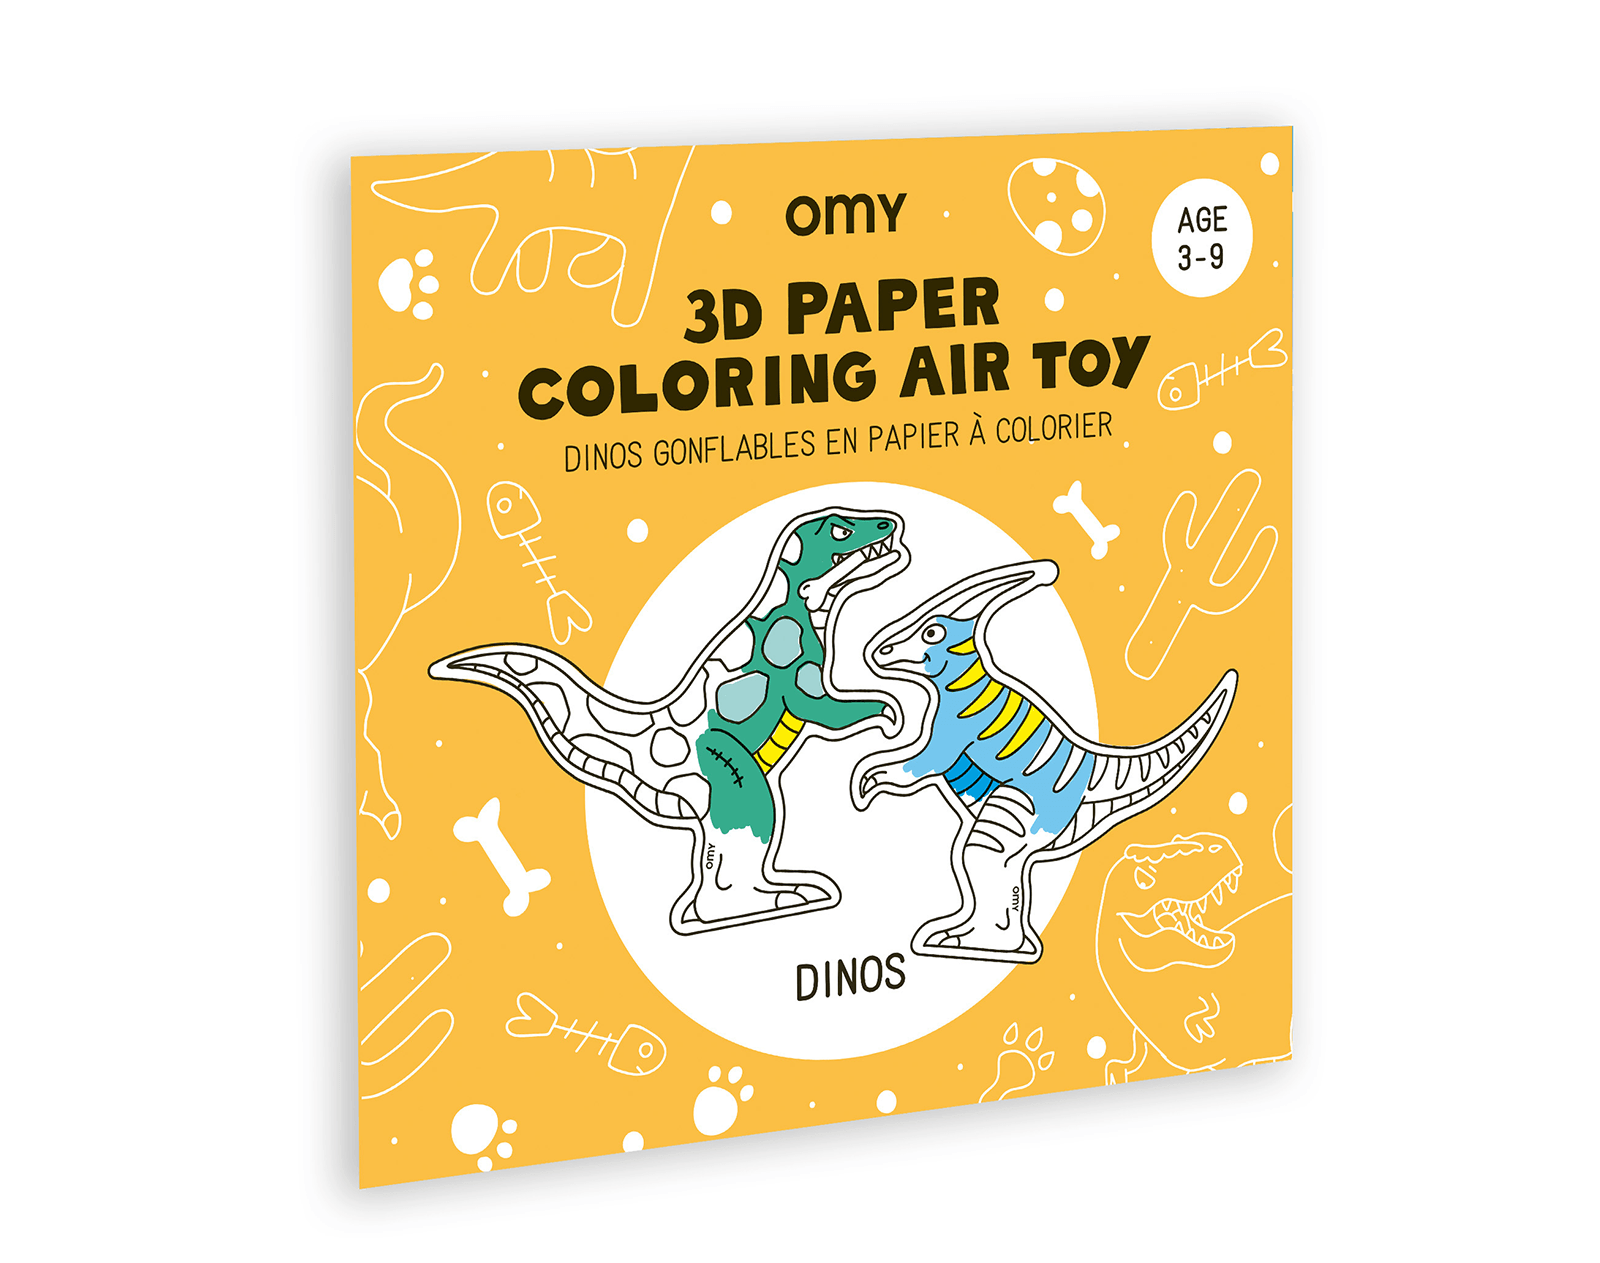 Dinosaur Coloring book for Children ages 5-8: A Ready-to-color